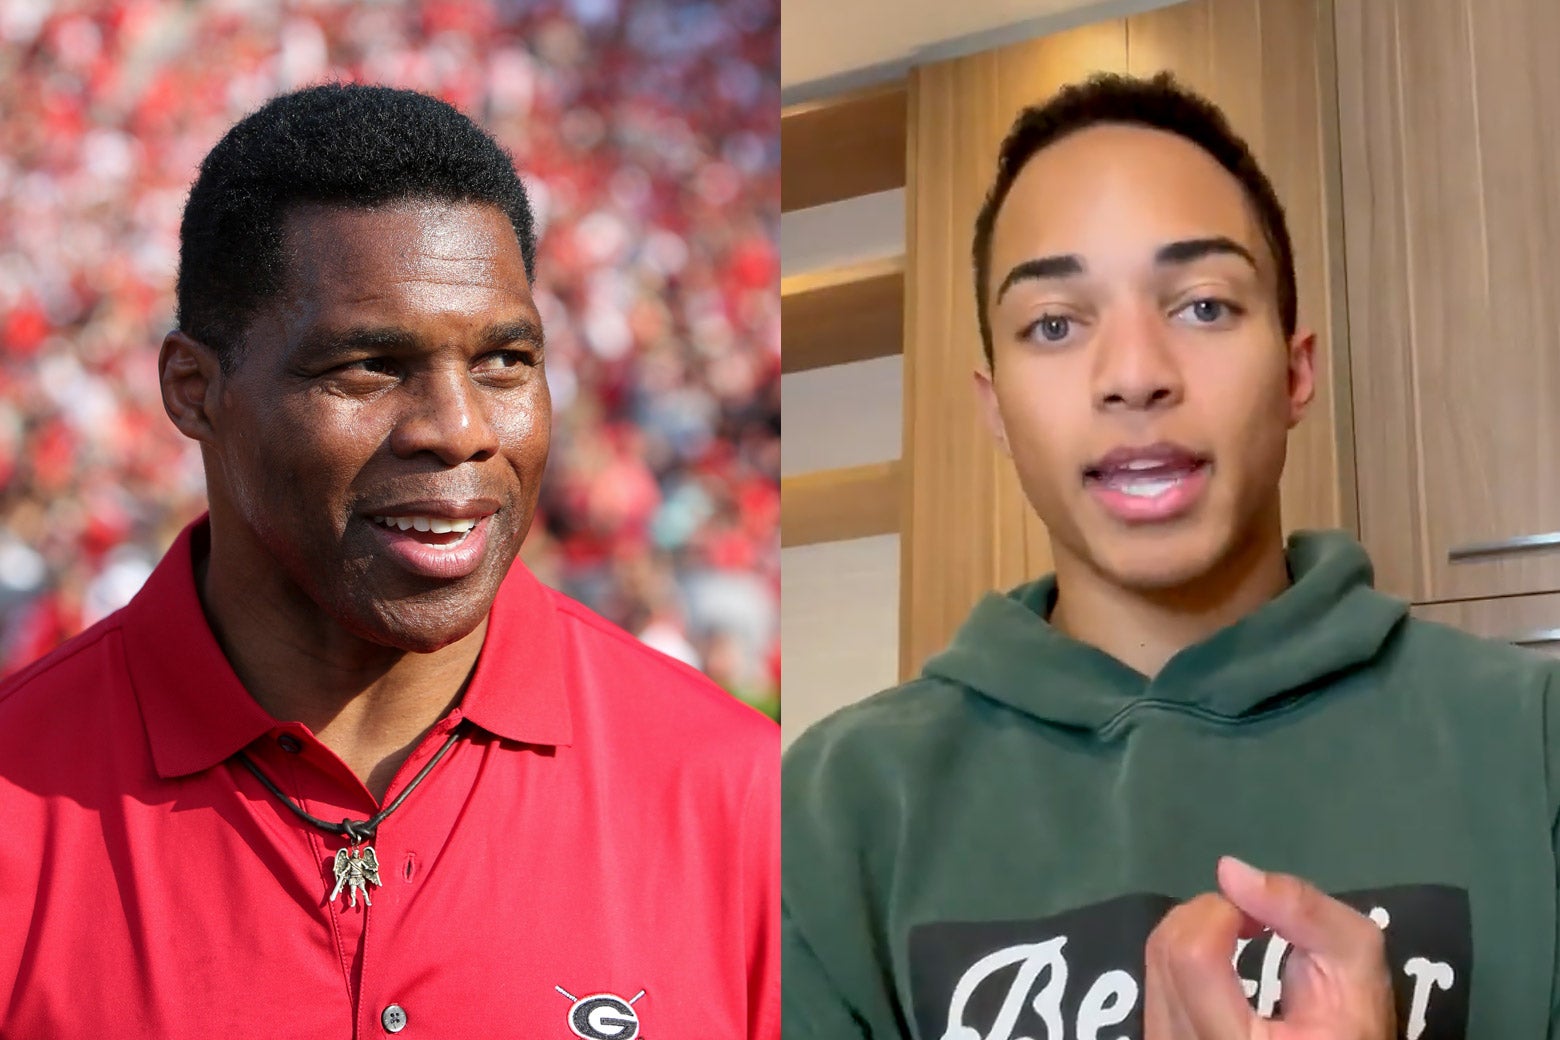 On the left, a photo of Herschel Walker in a red polo shirt, and on the right, a screenshot of his son Christian Walker, wearing a green hoodie, speaking about his father in a video he posted to Twitter.